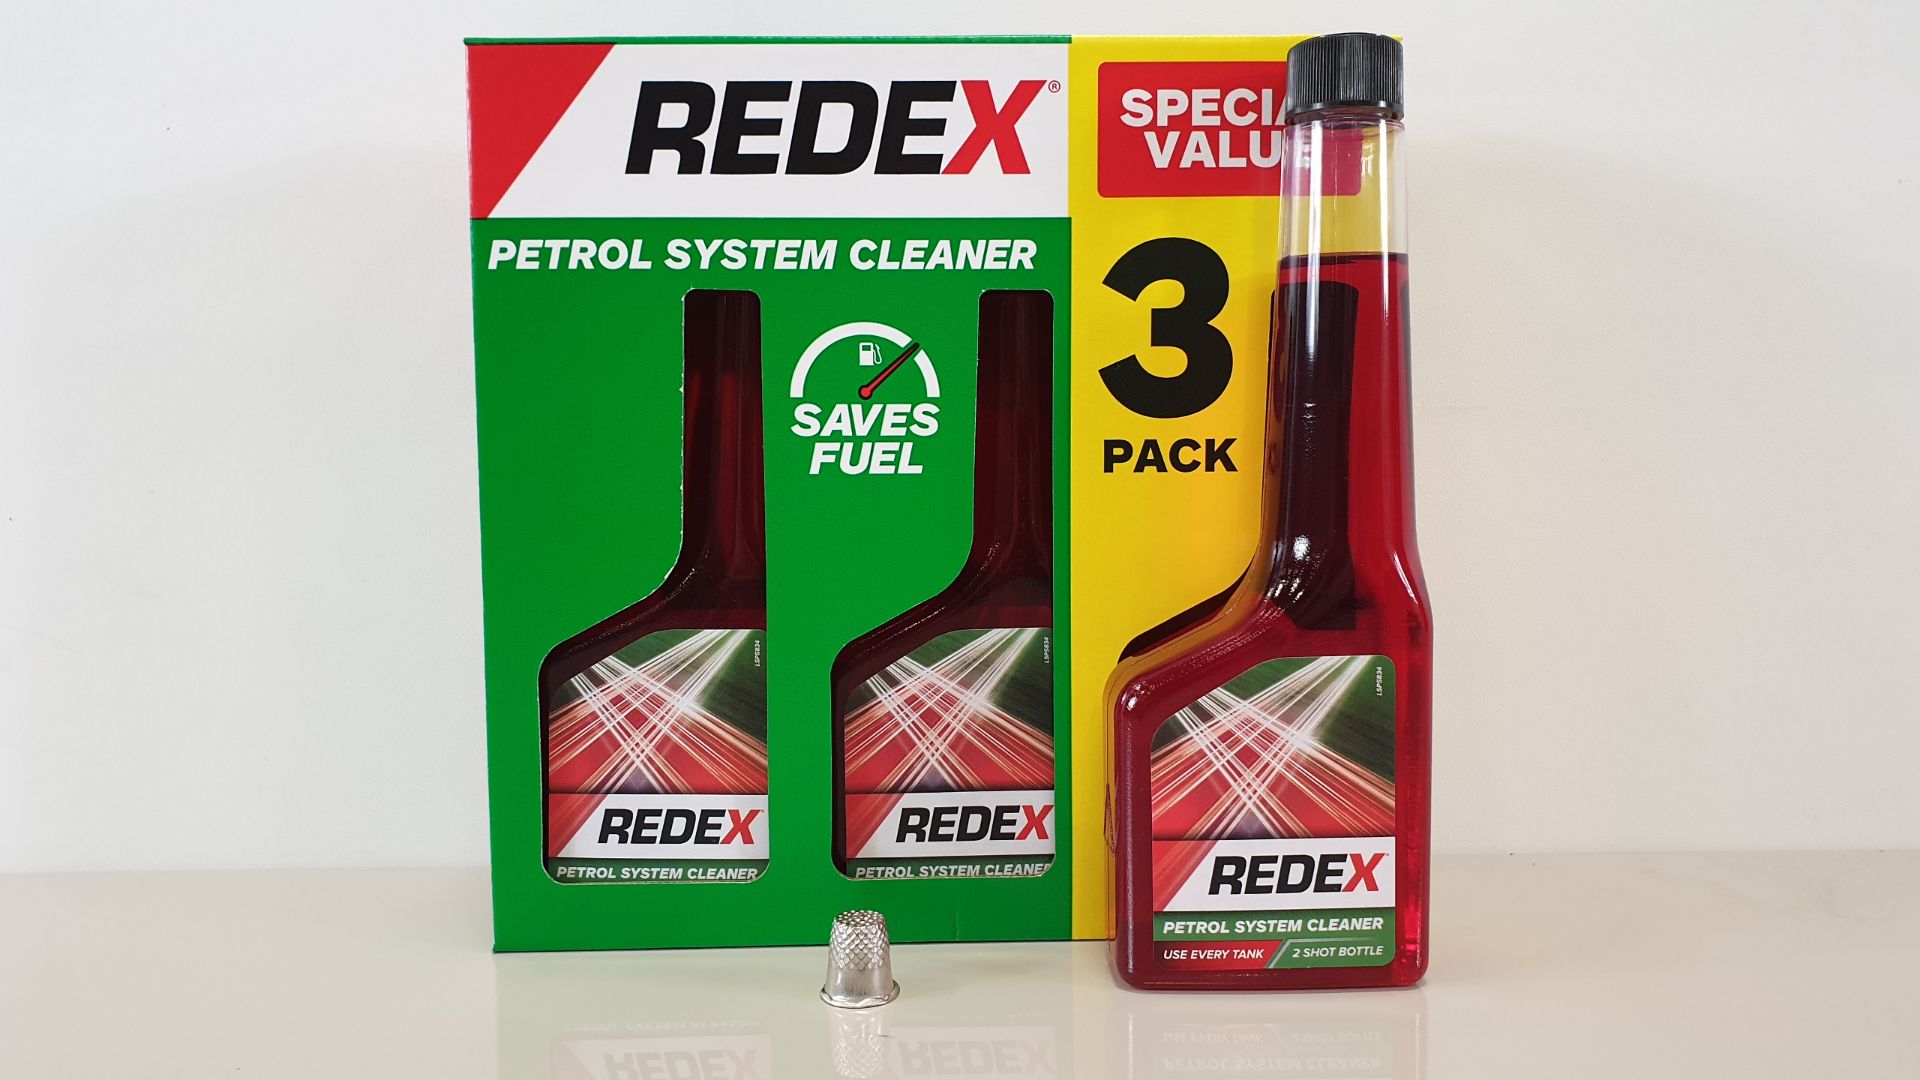 18 X PACKS OF 3 250 ML REDEX PETROL SYSTEM CLEANER - IN 3 CARTONS (RADD0006A)